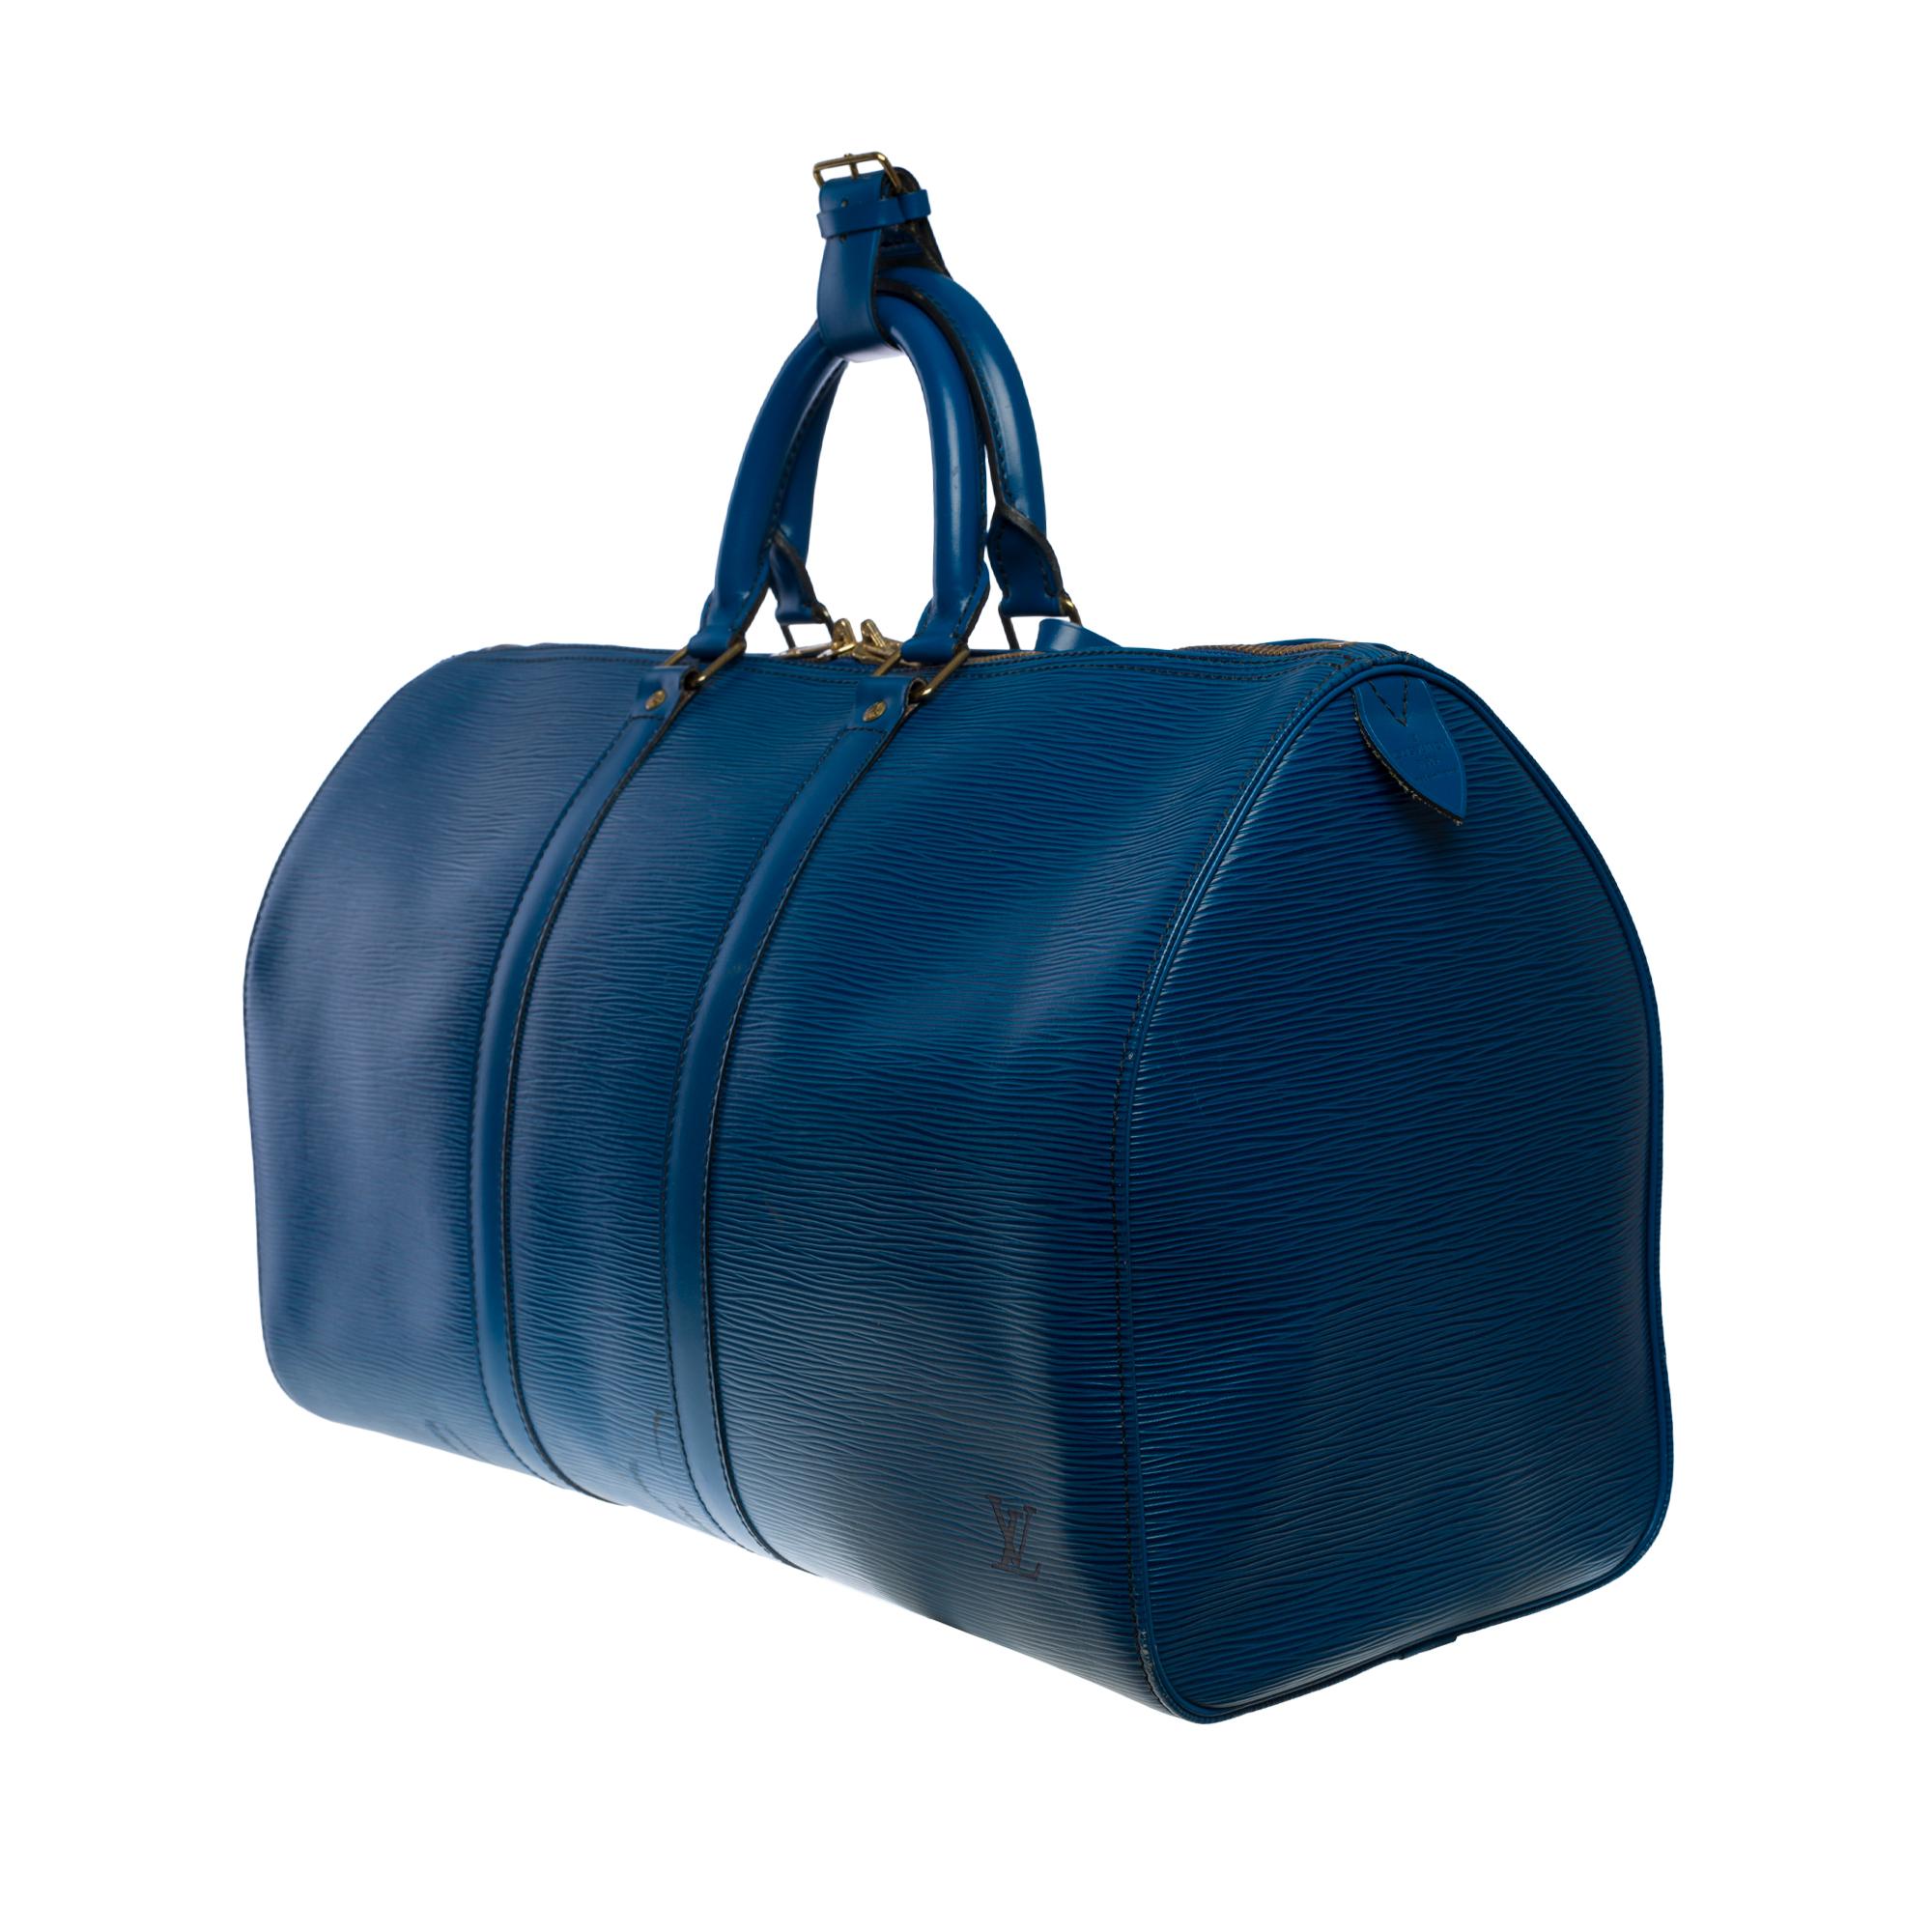 Women's or Men's The very Chic Louis Vuitton Keepall 45 Travel bag in blue épi leather, GHW